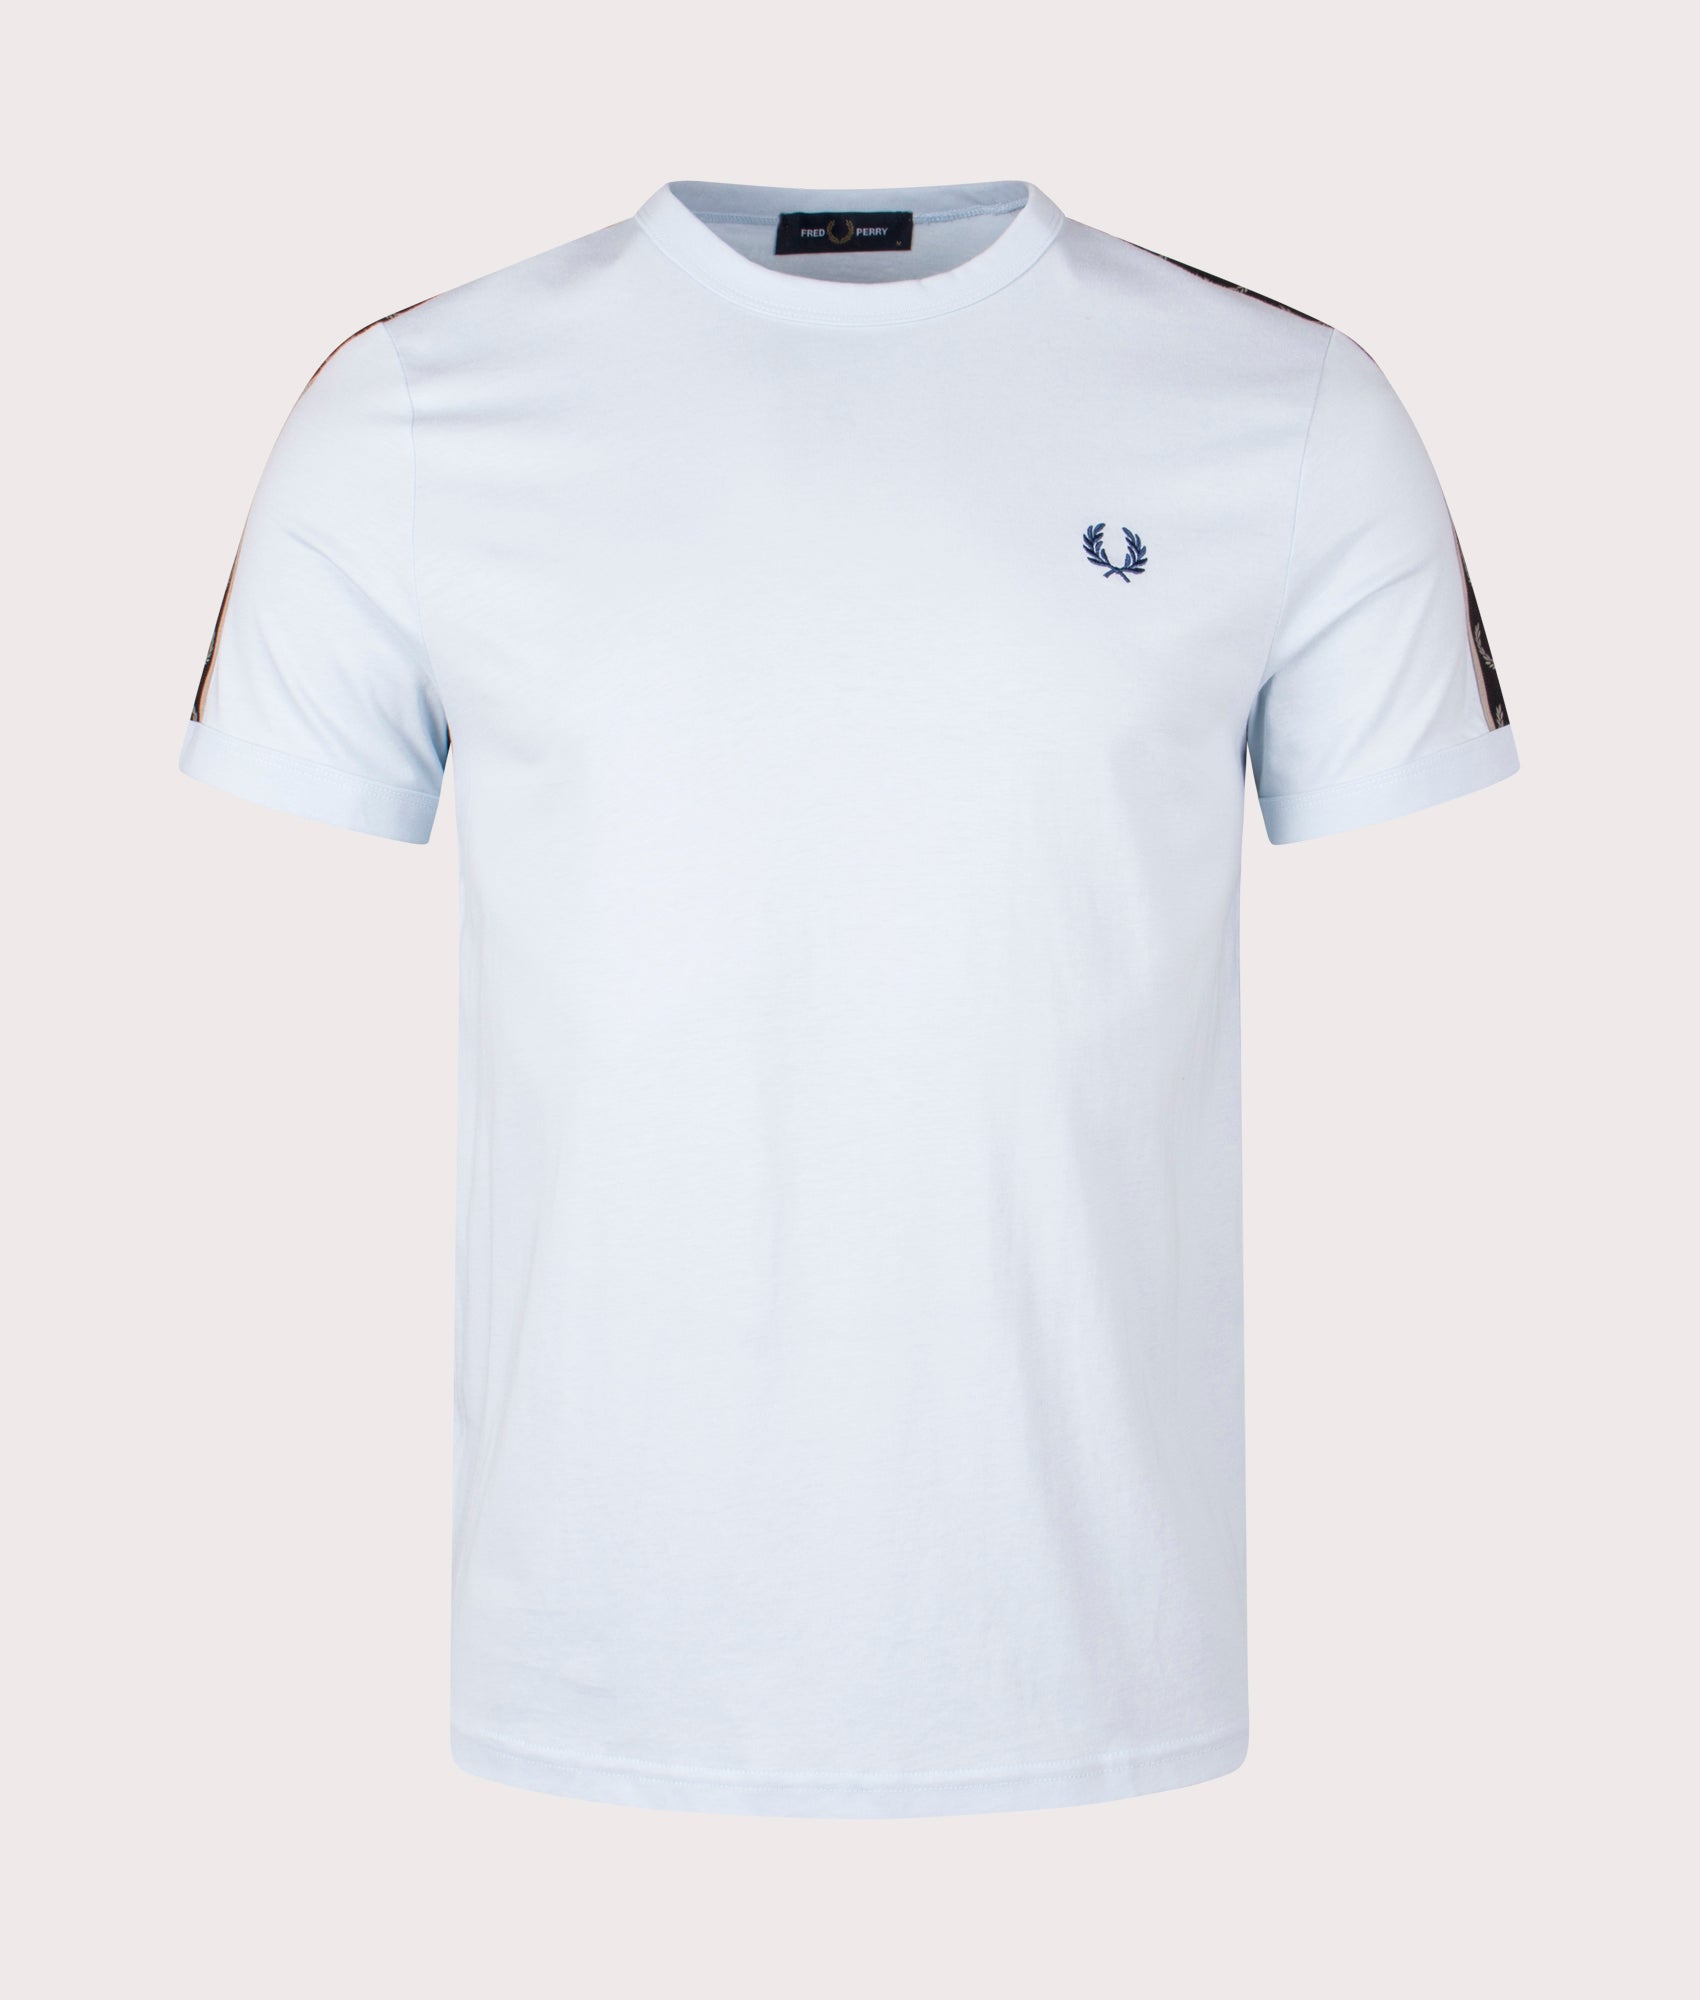 Fred Perry Mens Contrast Tape Ringer T-Shirt - Colour: V27 Light Ice/Warm Grey - Size: Large